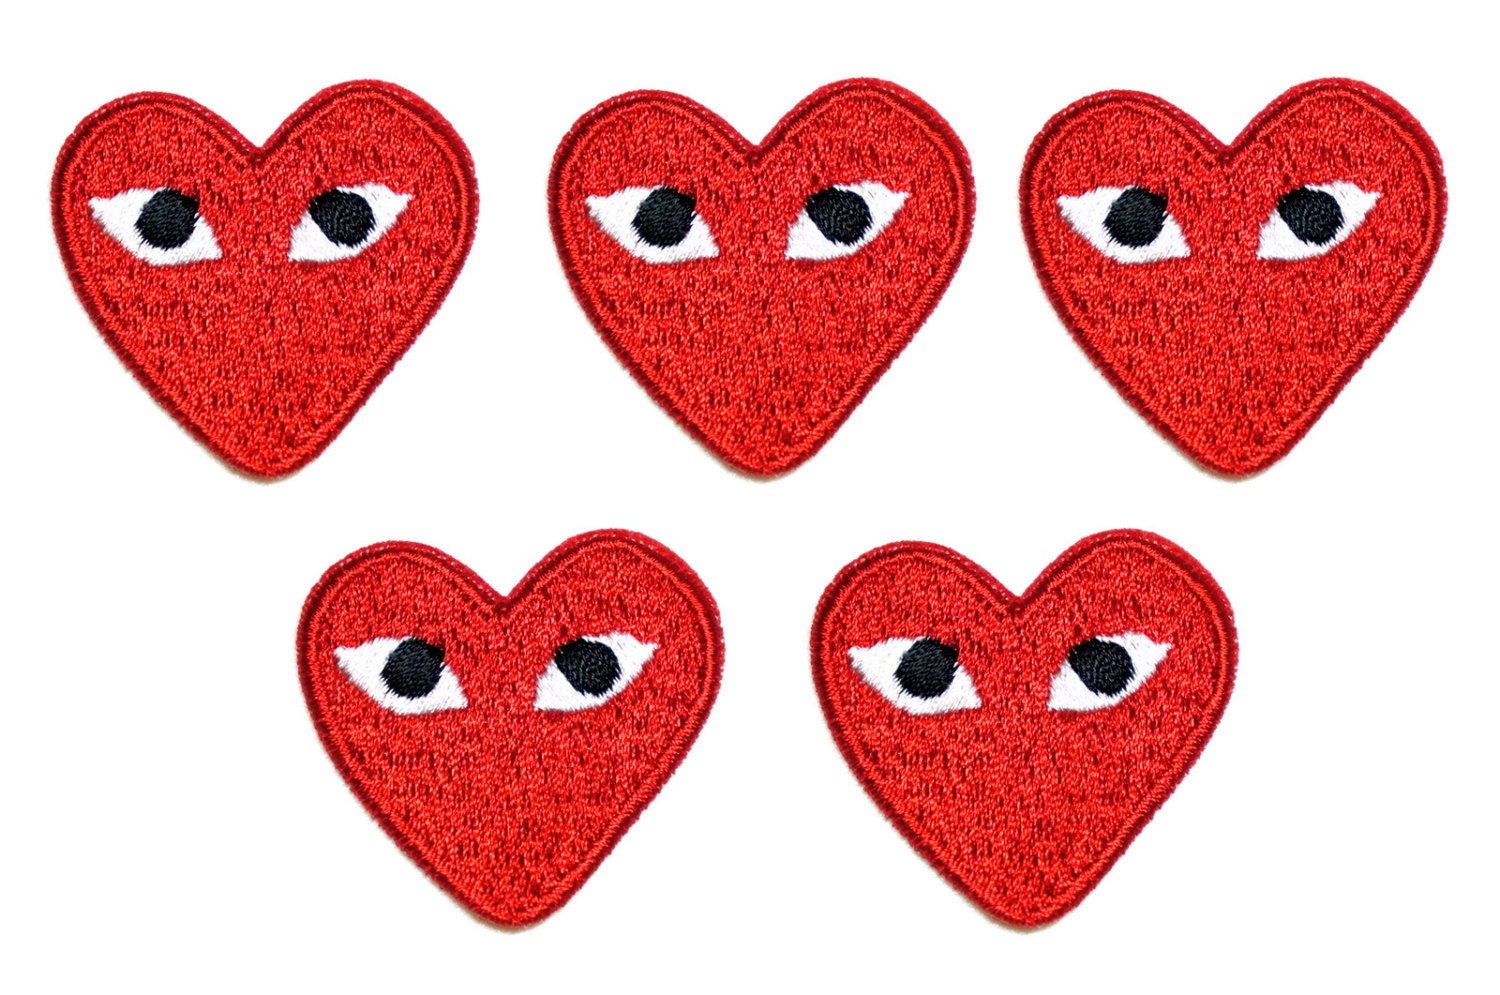 5 pcs Red COMME des GARCONS Embroidered Patch by MadeinHans